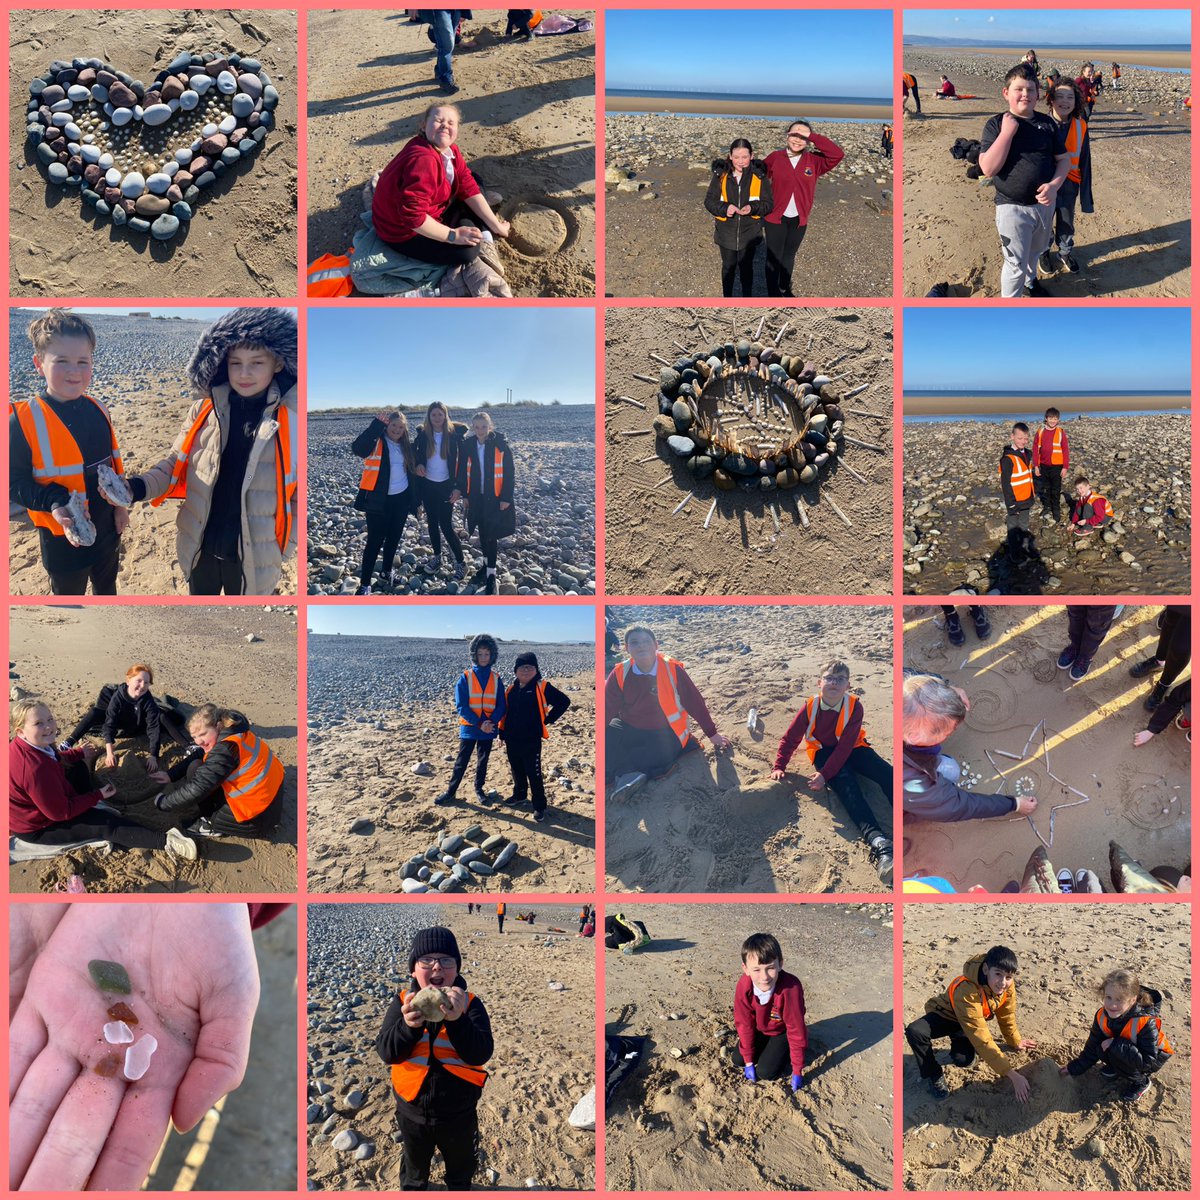 Dosbarth Mrs Jones had a brilliant sunny morning spent with @TimPughArtist at the beach creating our very own beach art ☀️